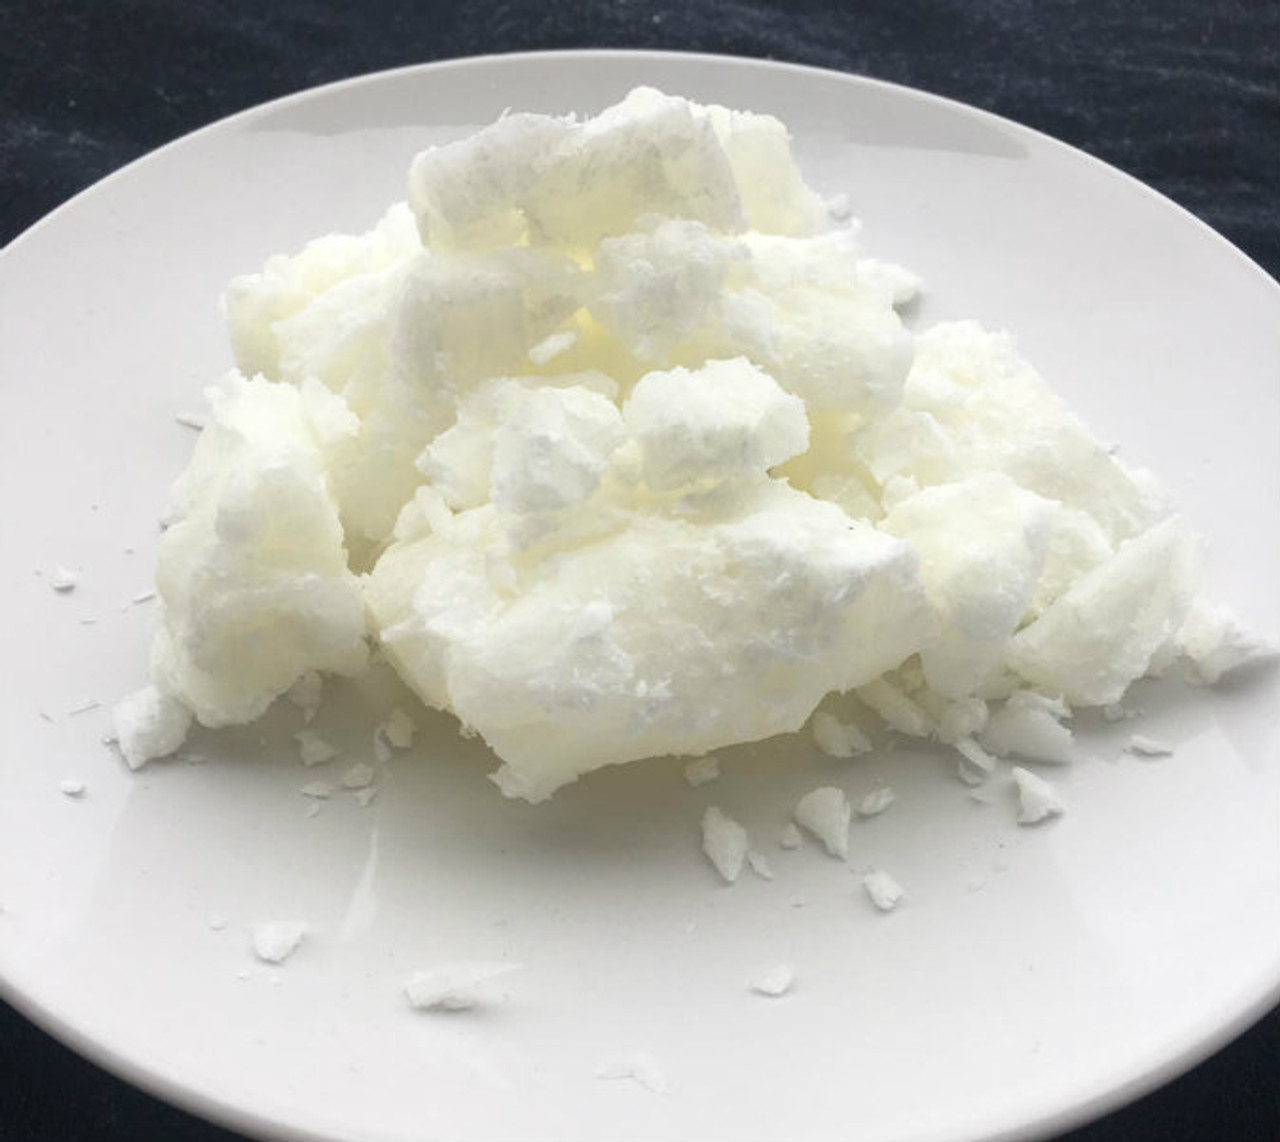 What's Murumuru Butter and How Do You Use It?